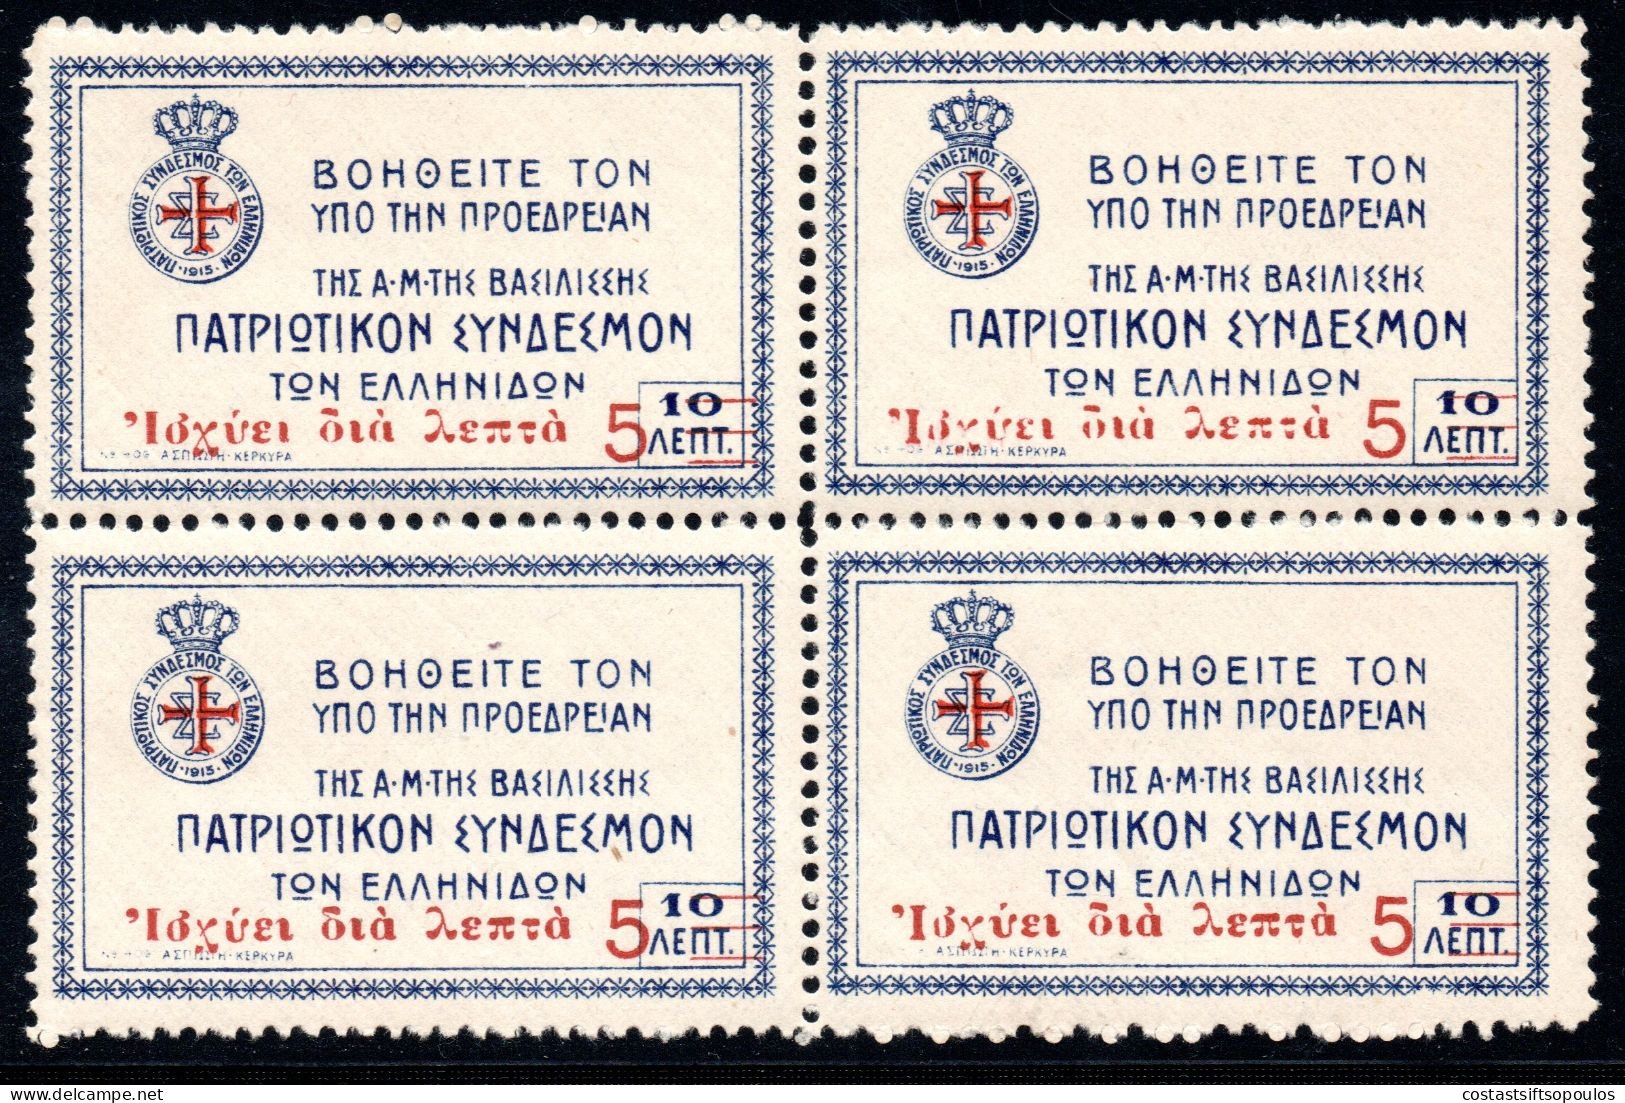 1787.GREECE.1922 CHARITY 5 L / 10 L. HELLAS  C56a MNH BLOCK OF 4. DOES NOT LOOK GENUINE,SOLD AS IS,SPACE FILLER. - Charity Issues